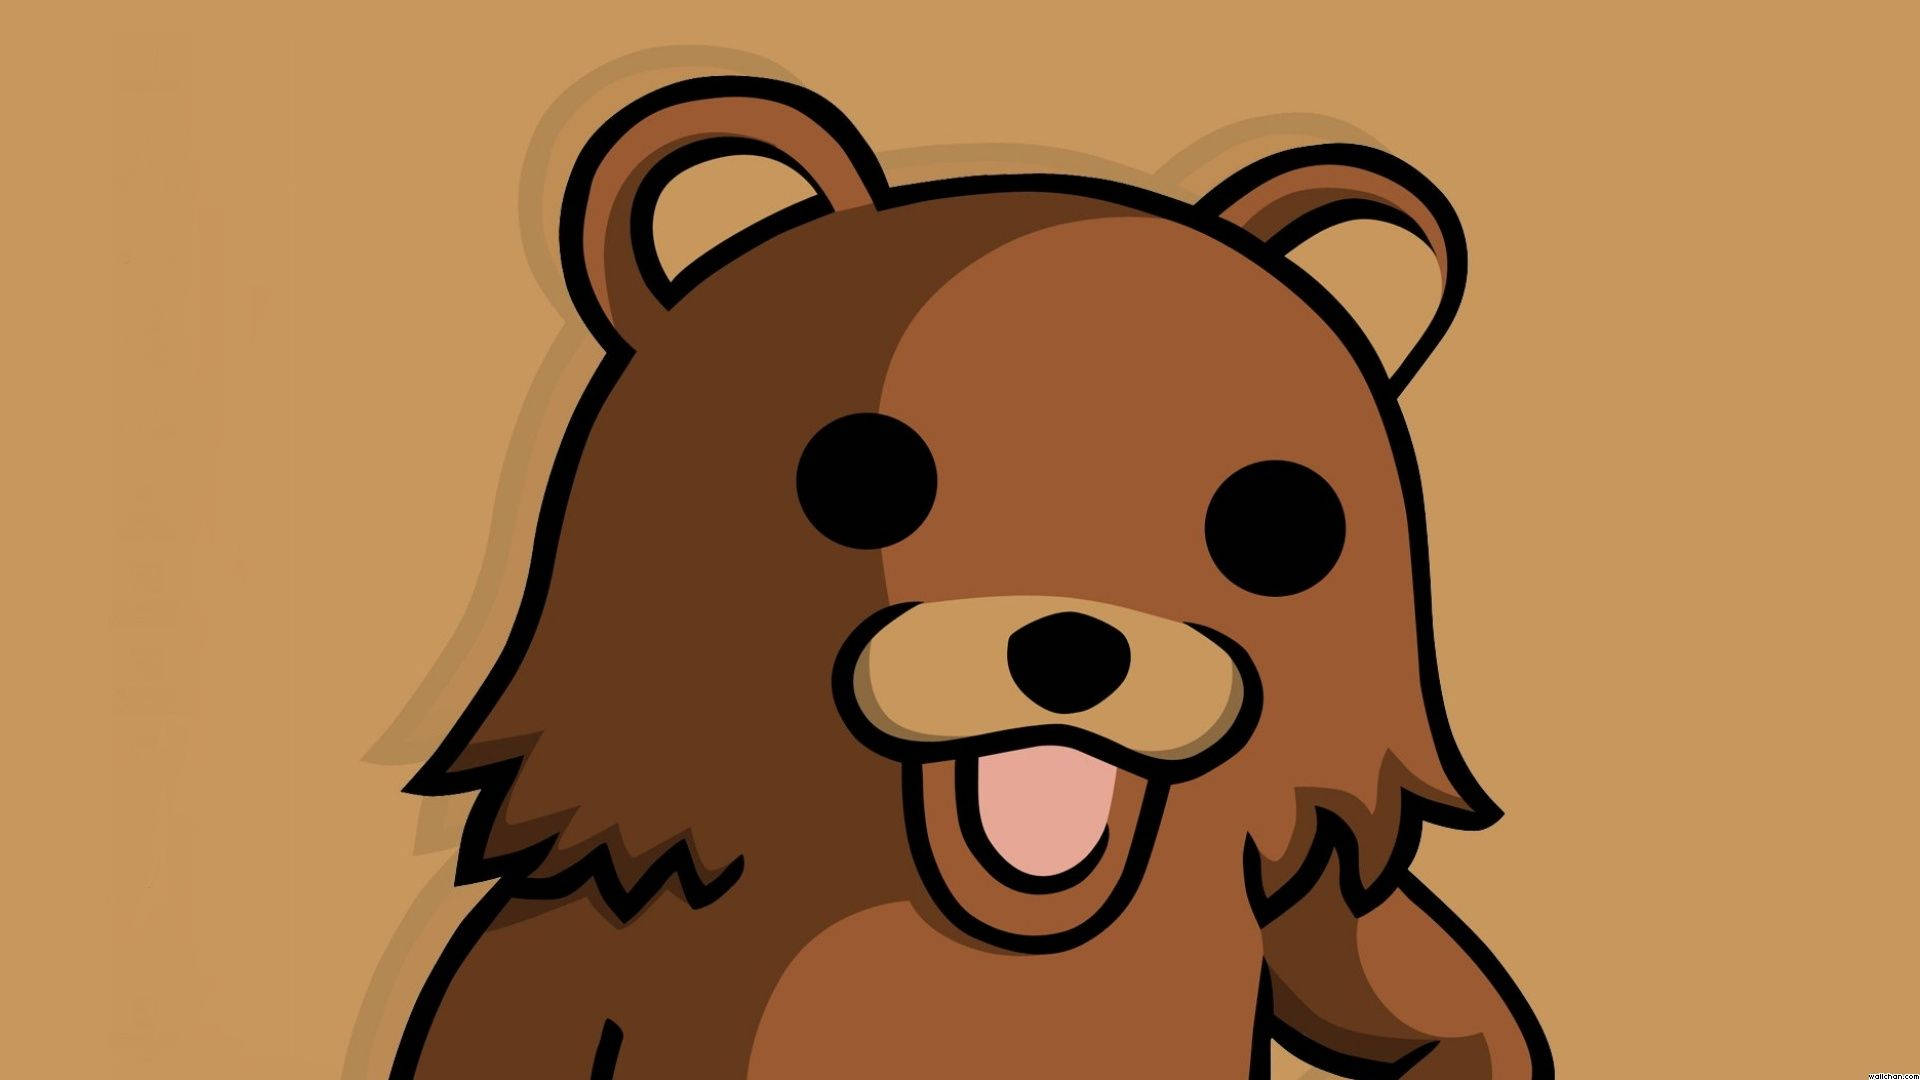 Funny brown pedo bear meme with black eyes and open mouth on light brown background. 